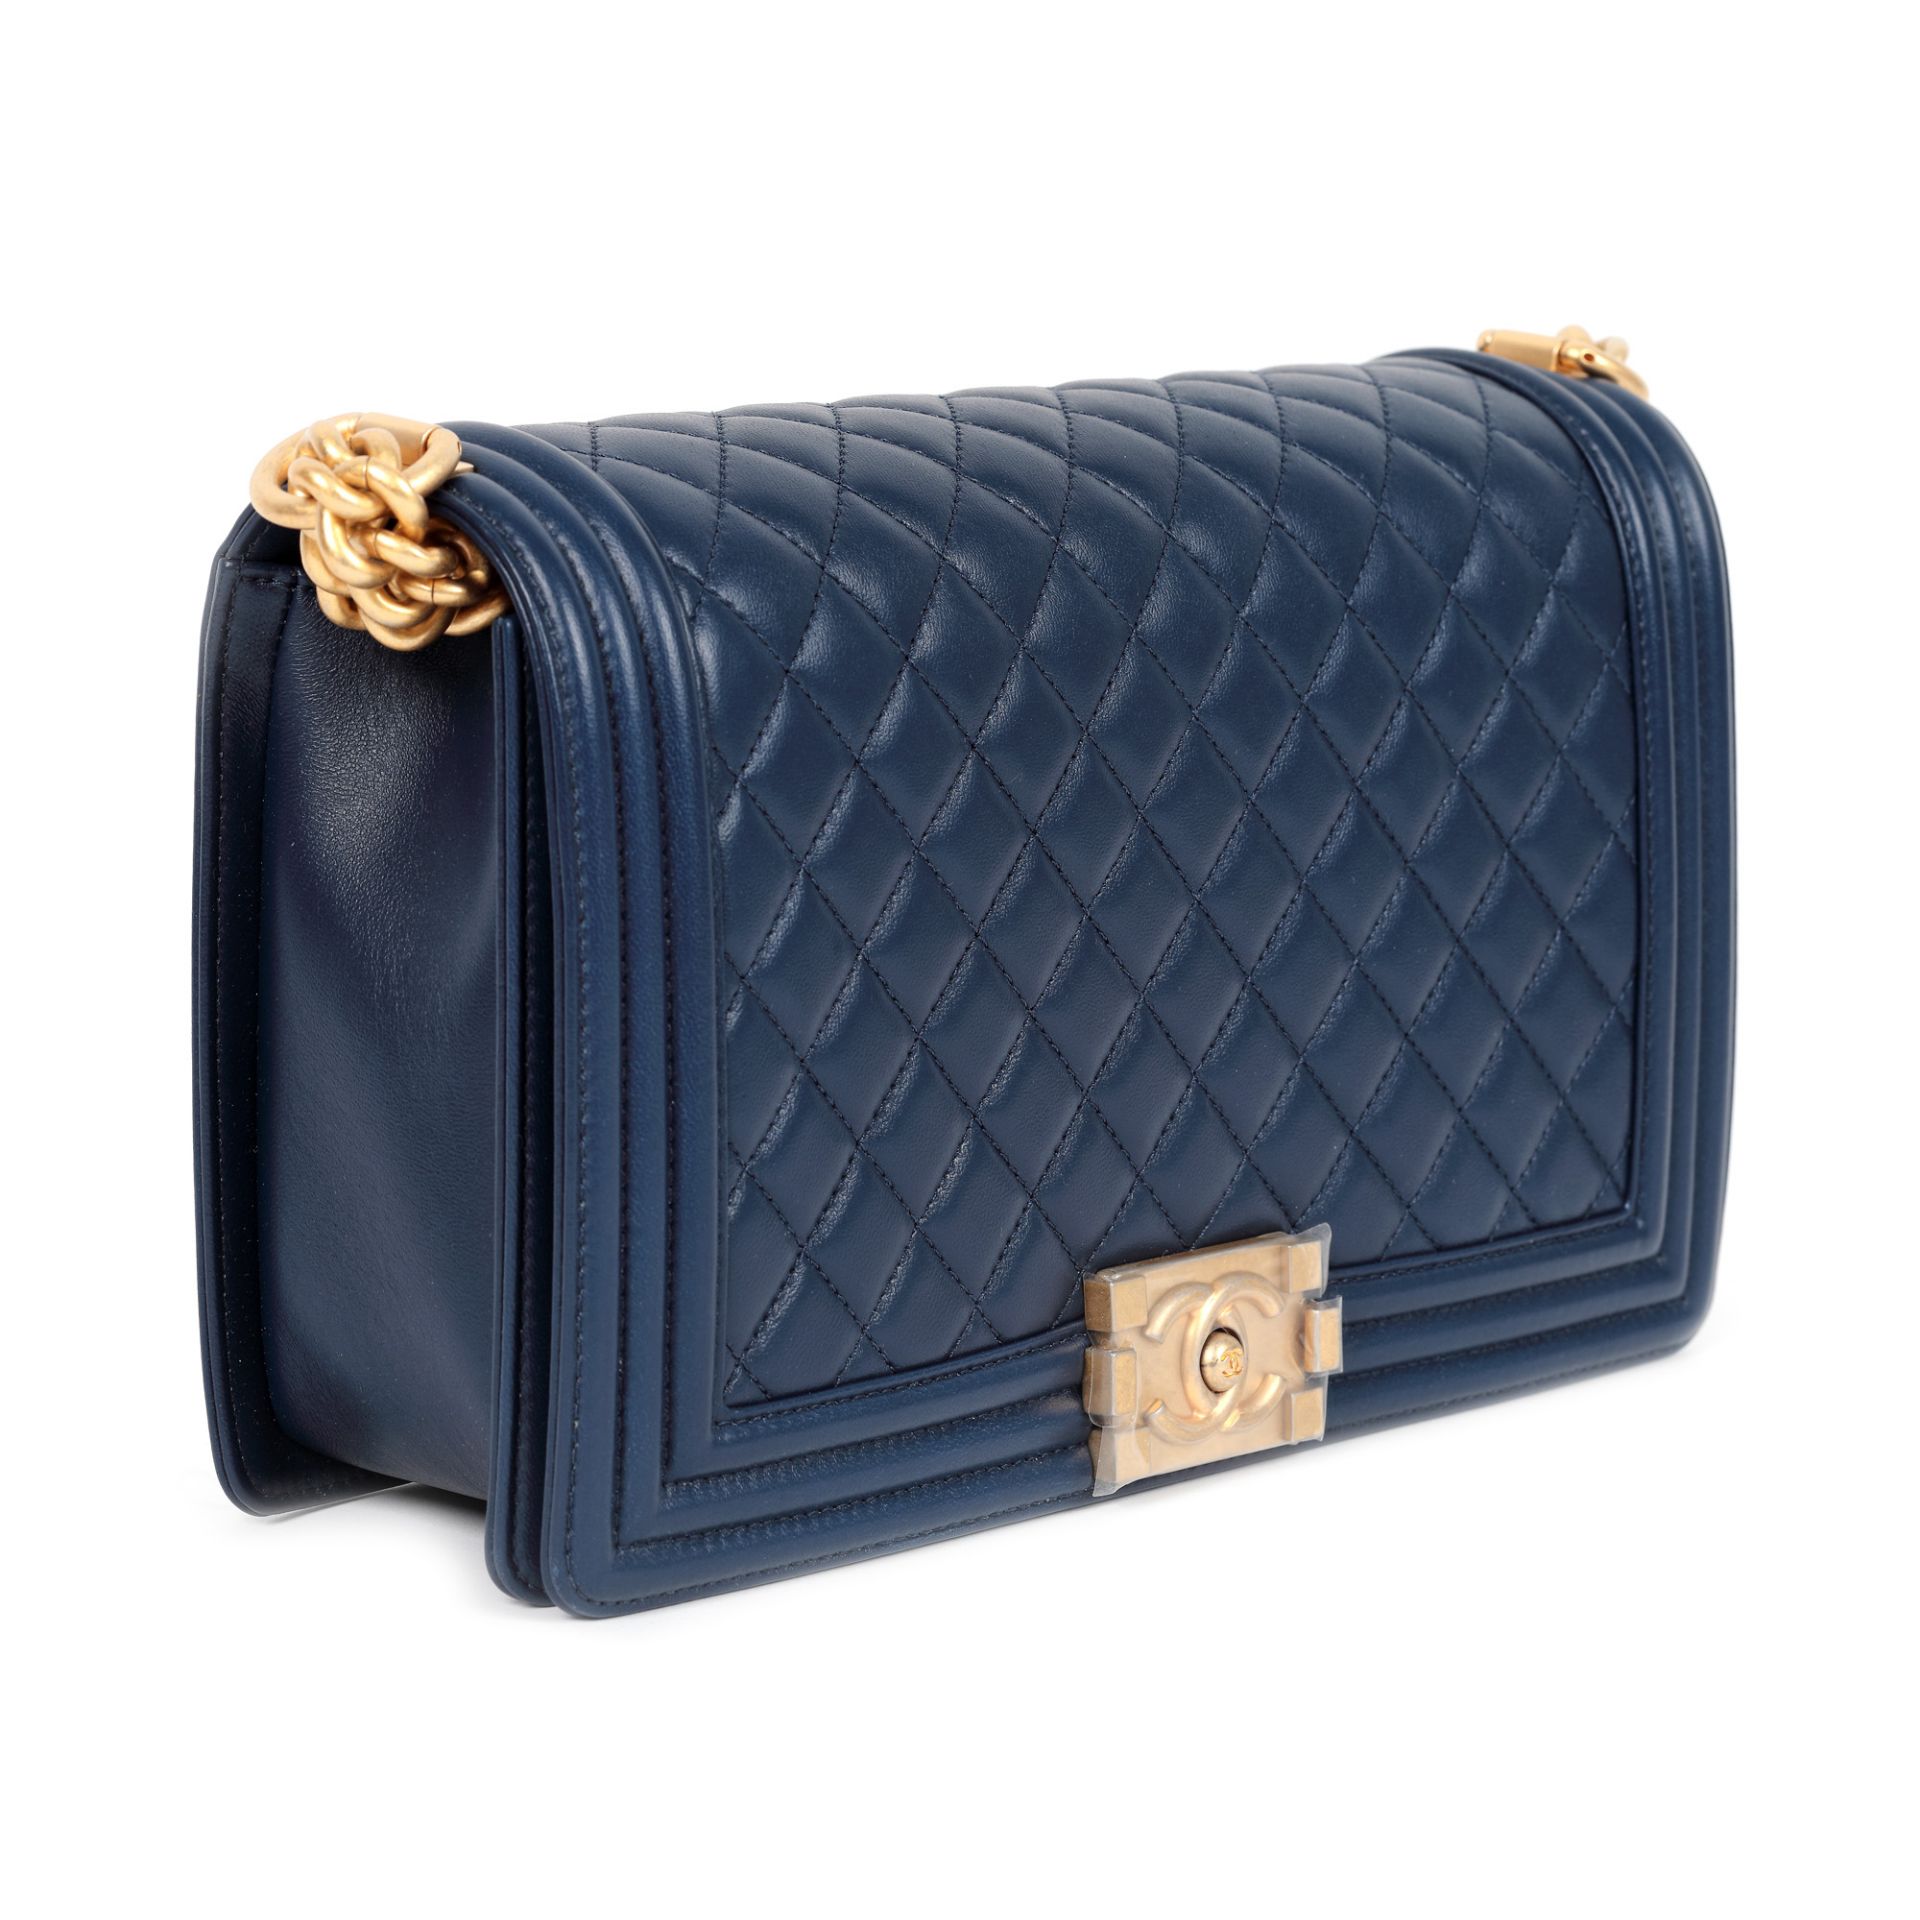 "Boy" - Chanel bag, quilted leather, blue, authenticity card and original cover - Image 2 of 5